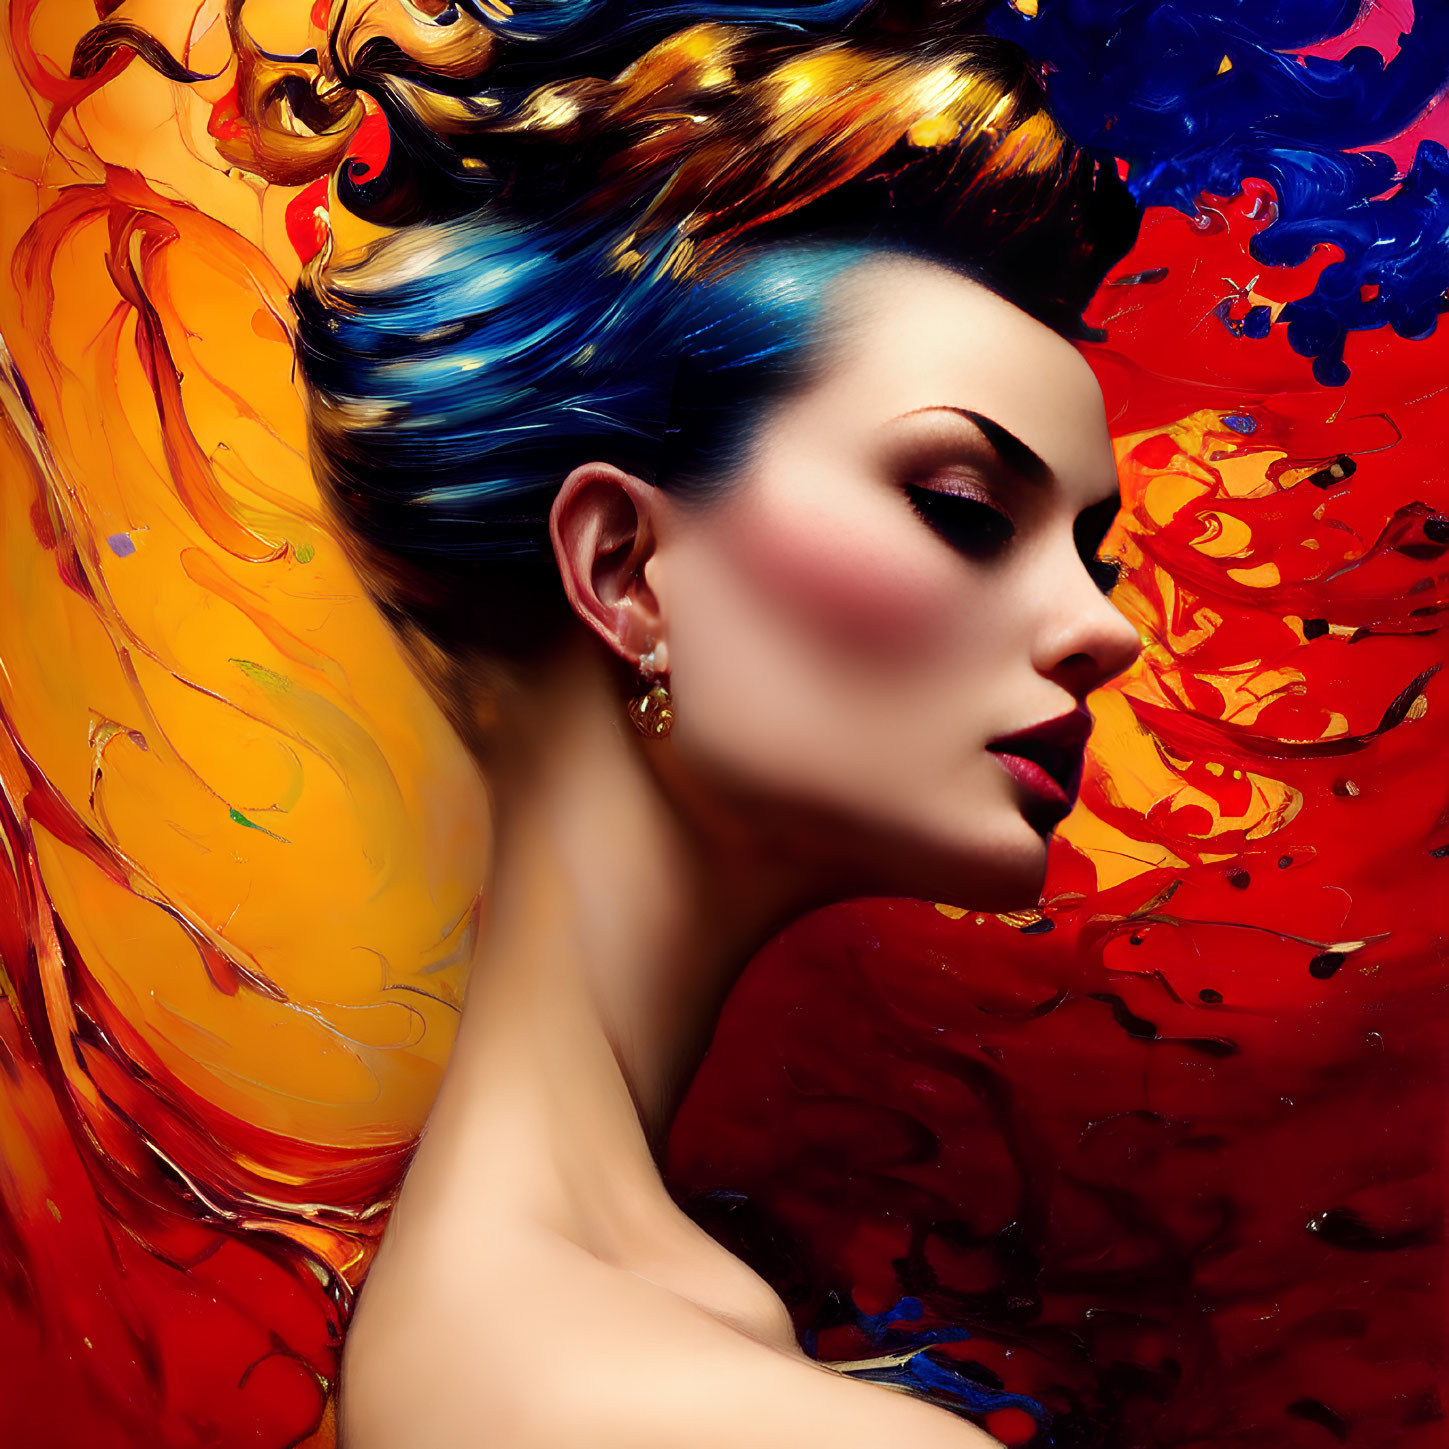 Profile Portrait of Woman with Vibrant, Flowing Hair and Abstract Color Splash